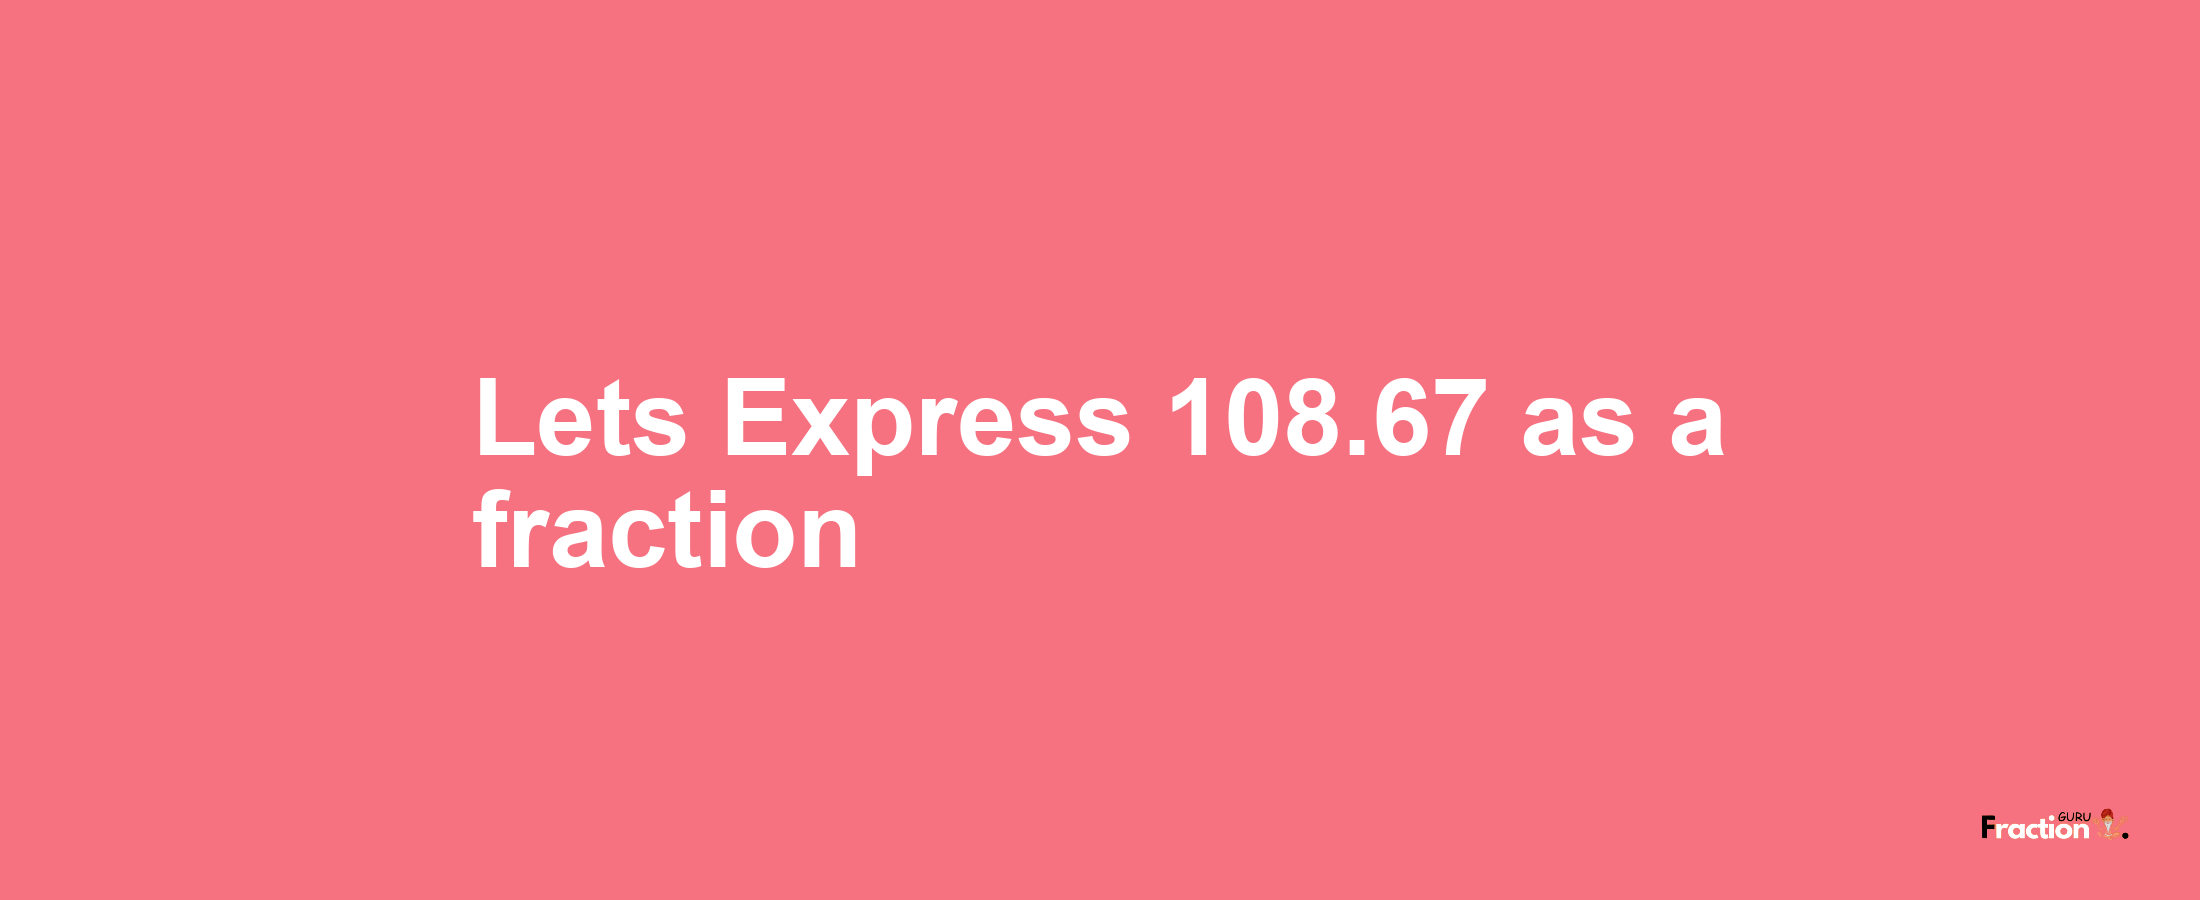 Lets Express 108.67 as afraction